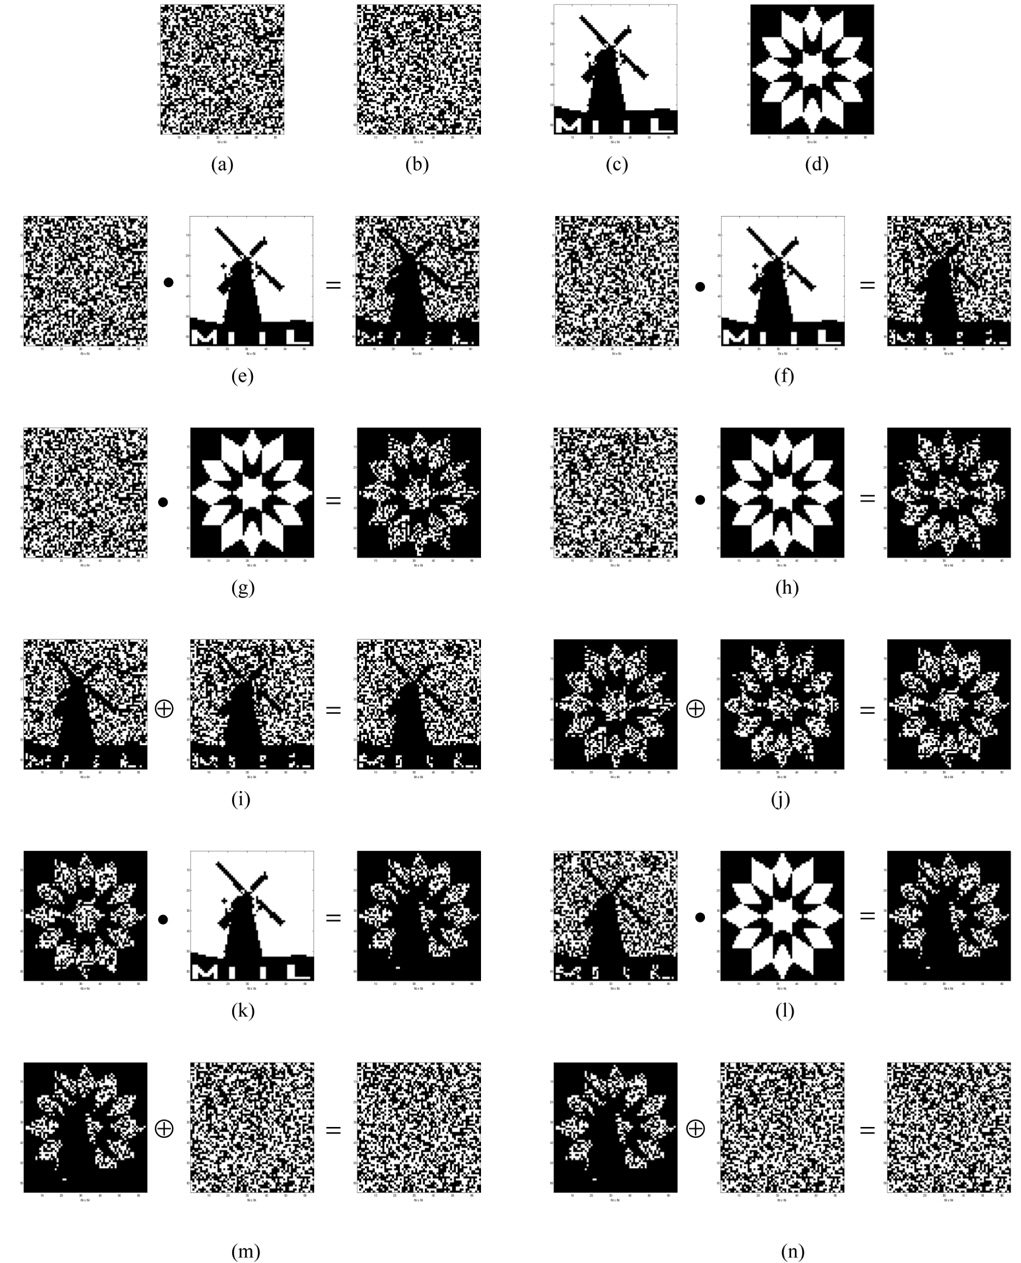 Numerical simulations: (a) a generator G in public, (b) a random number P in public, (c) a binary mill image A as Alice’s secret number, (d) a binary flower image B as Bob’s secret number, (e) G AND A, (f) P AND A, (g) G AND B, (h) P AND B, (i) KA=(G AND A) XOR (P AND A), (j) KB=(G AND B) XOR (P AND B), (k) KB AND A, (l) KA AND B, (m) (KB AND A) XOR P, (n) (KA AND B) XOR P.